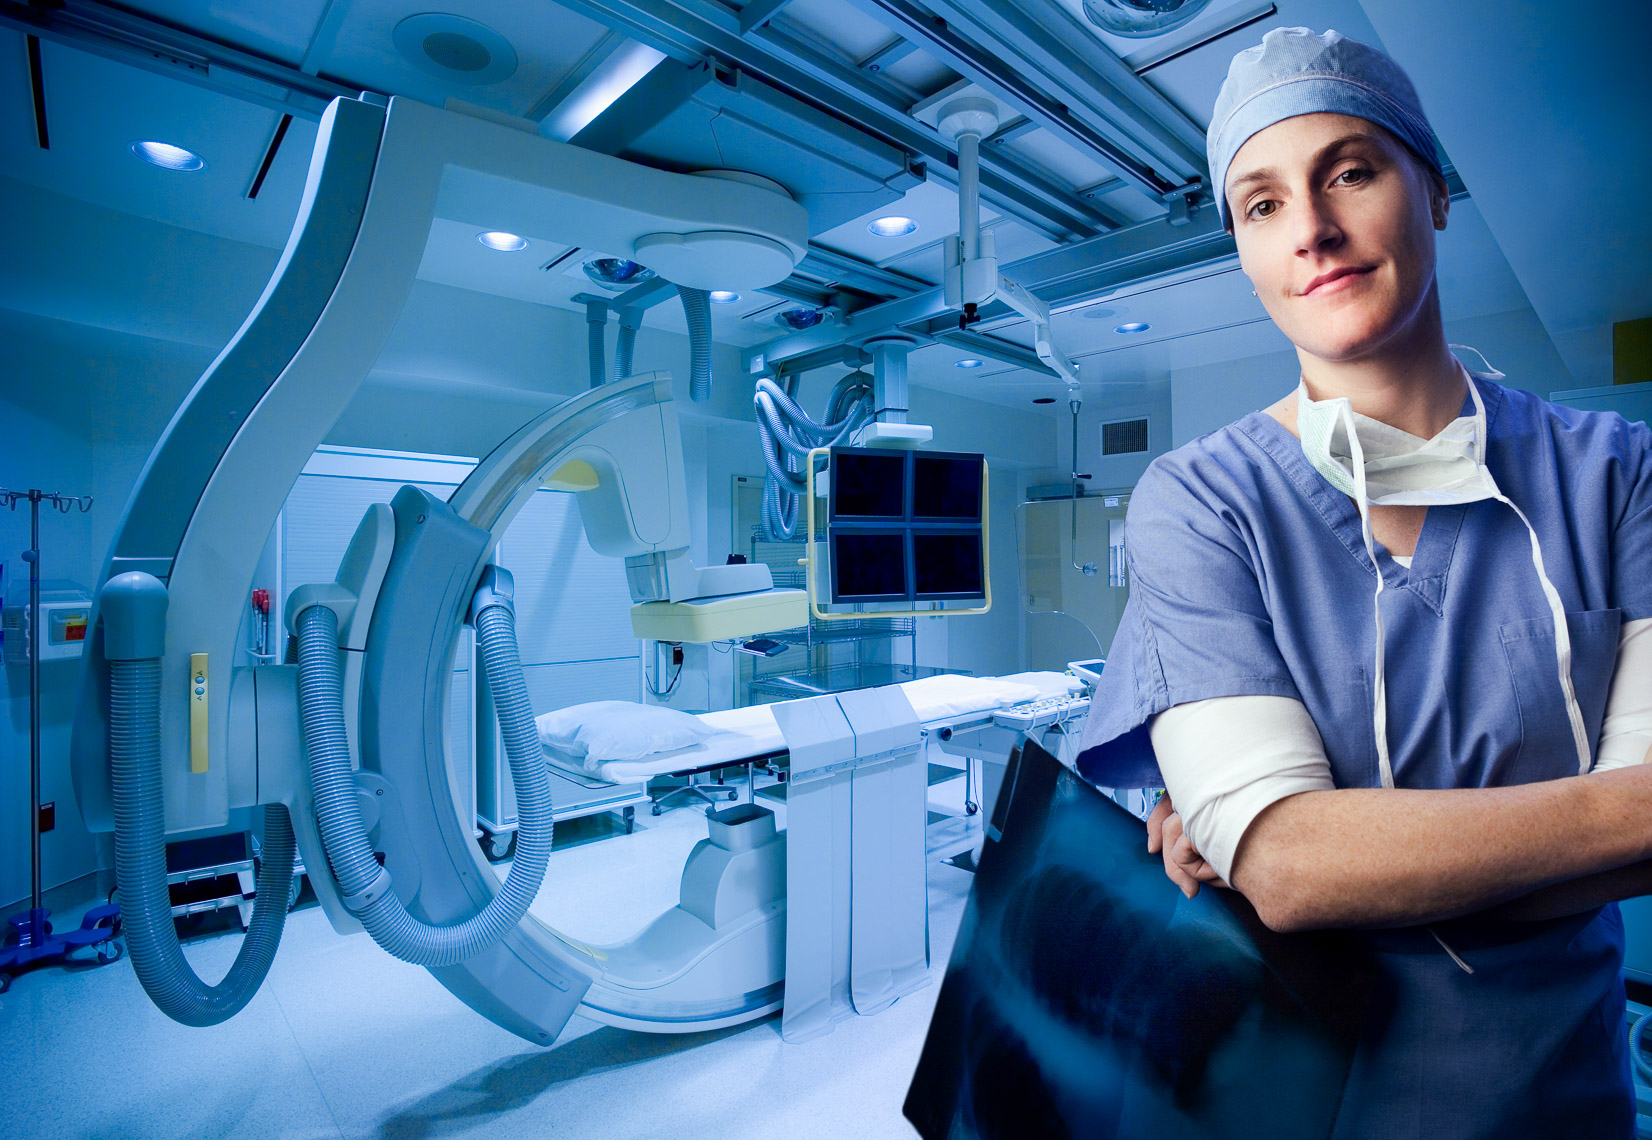 Radiologist portrait in an Interventional Radiology suite by healthcare photographer Robert Houser